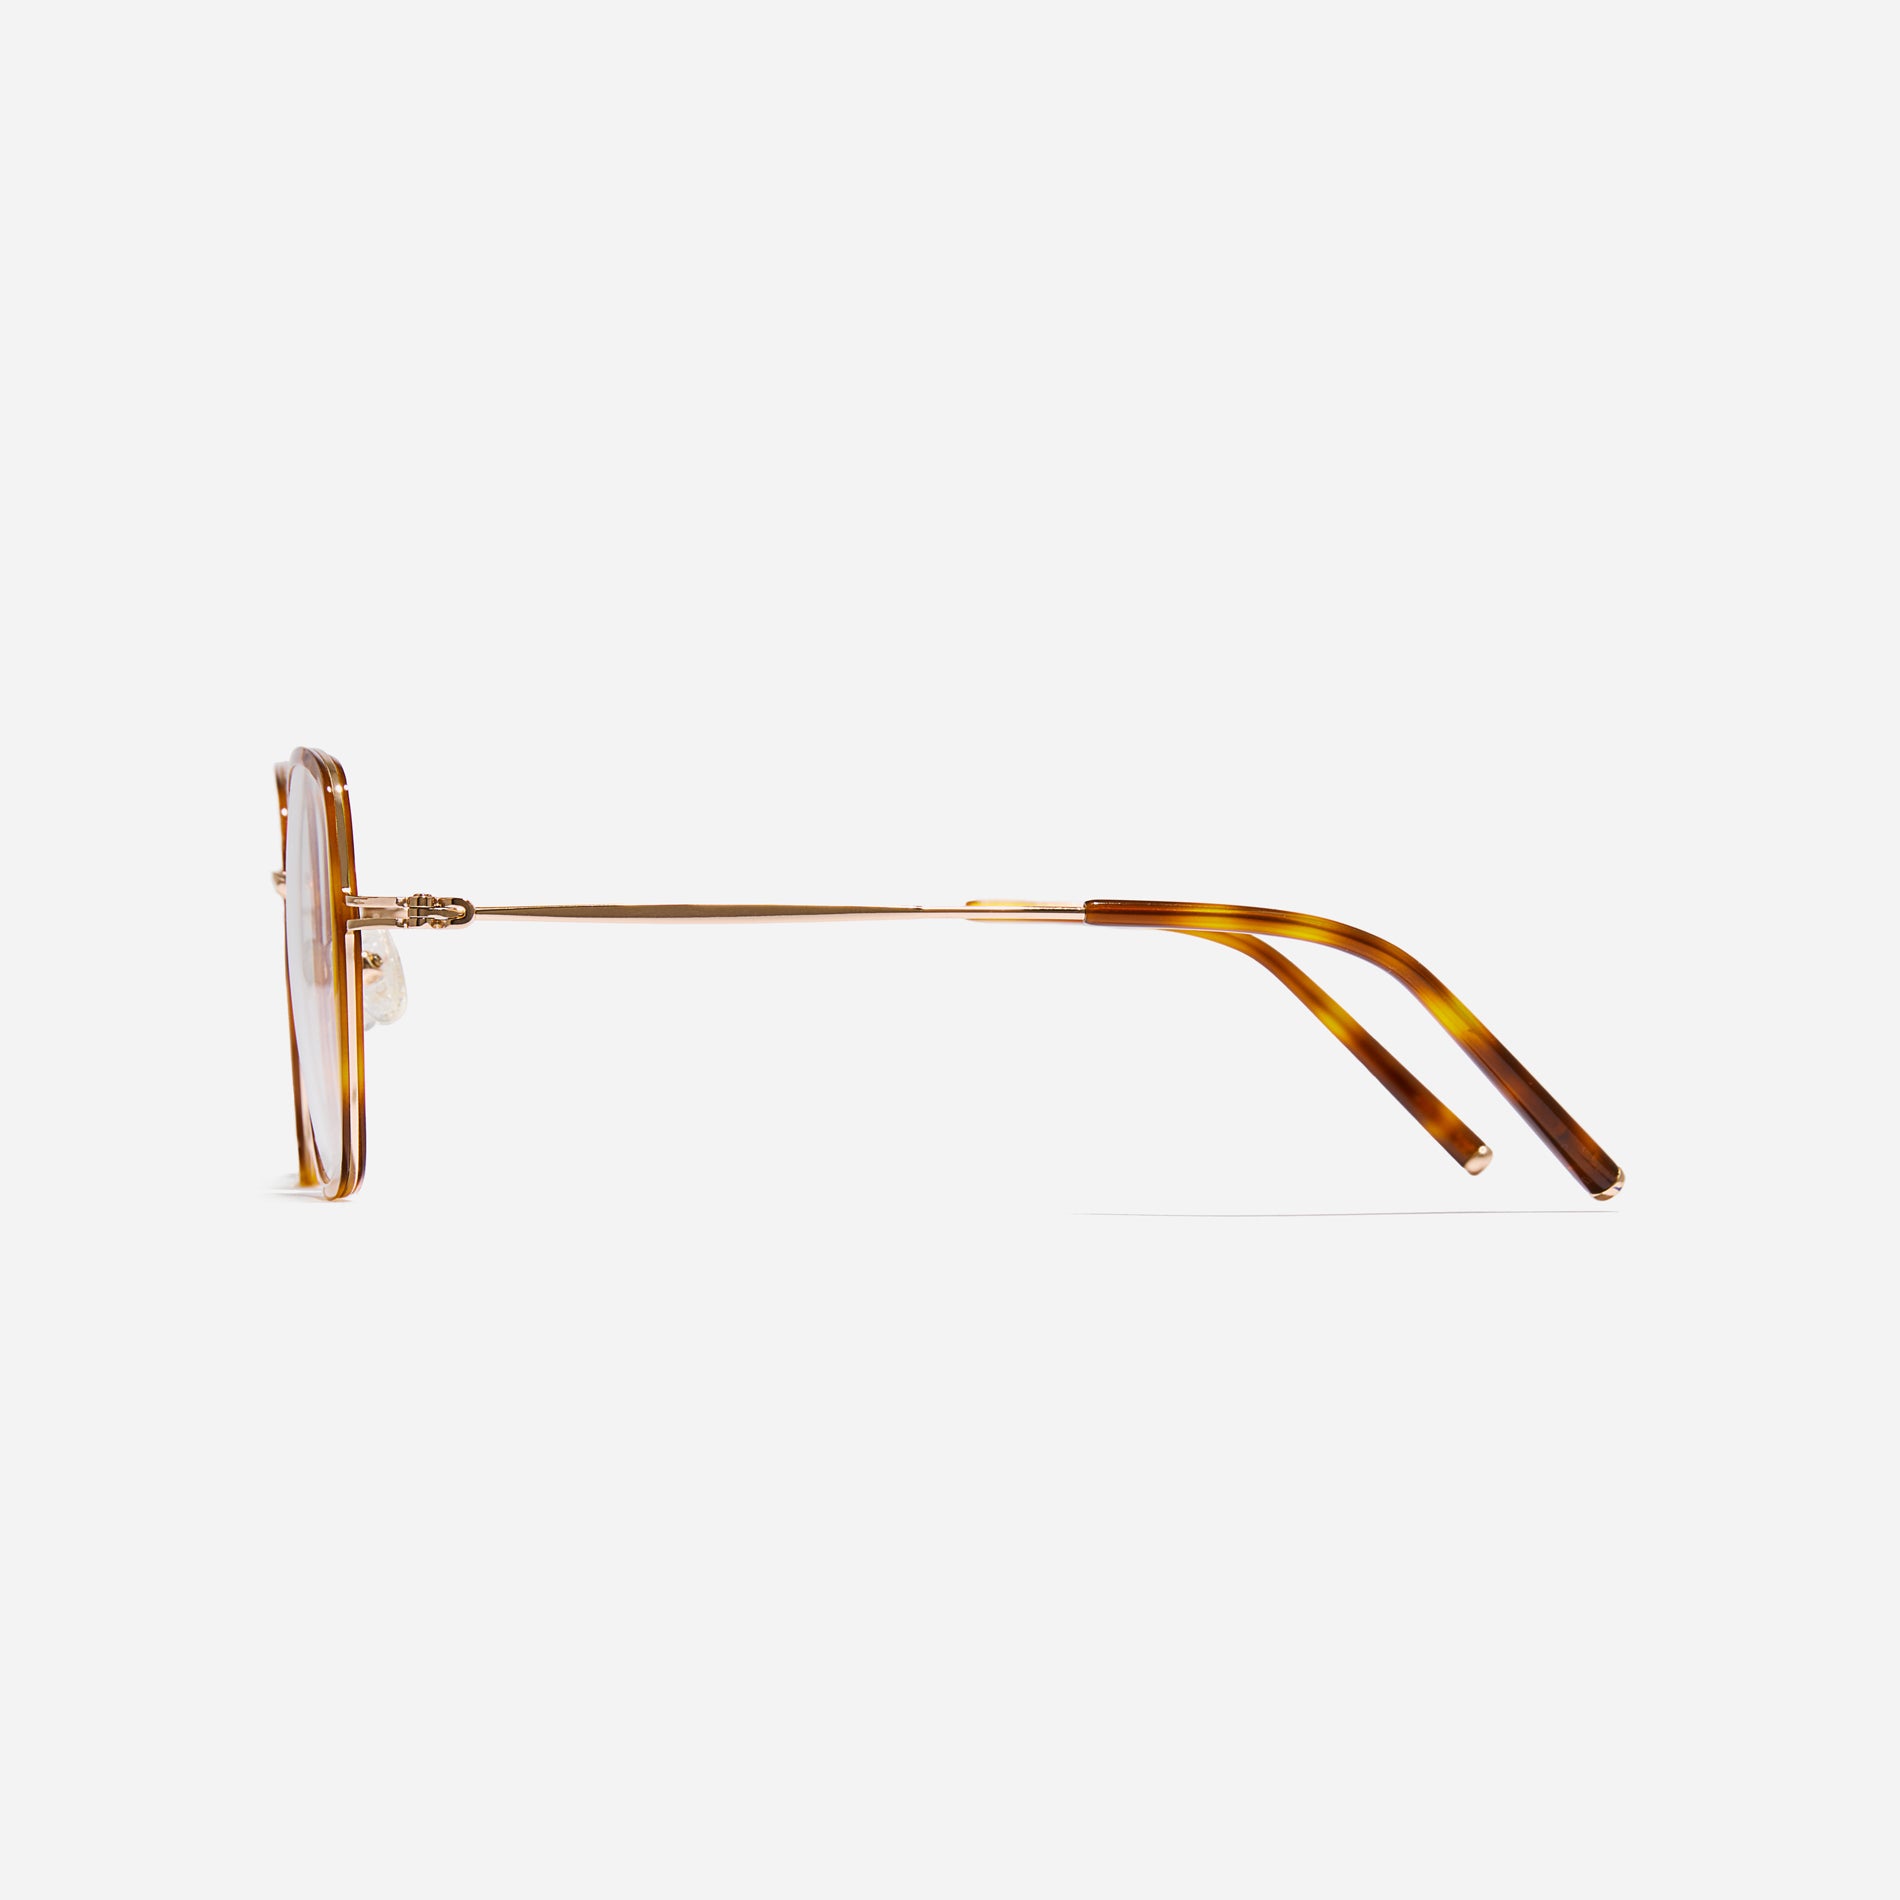 Rectangular-shaped oversized eyeglasses  characterized by a delicate acetate rim that secures the frame and hinge details.  The slim temples, made from lightweight and elastic B-Titanium material, ensure a consistently comfortable fit.